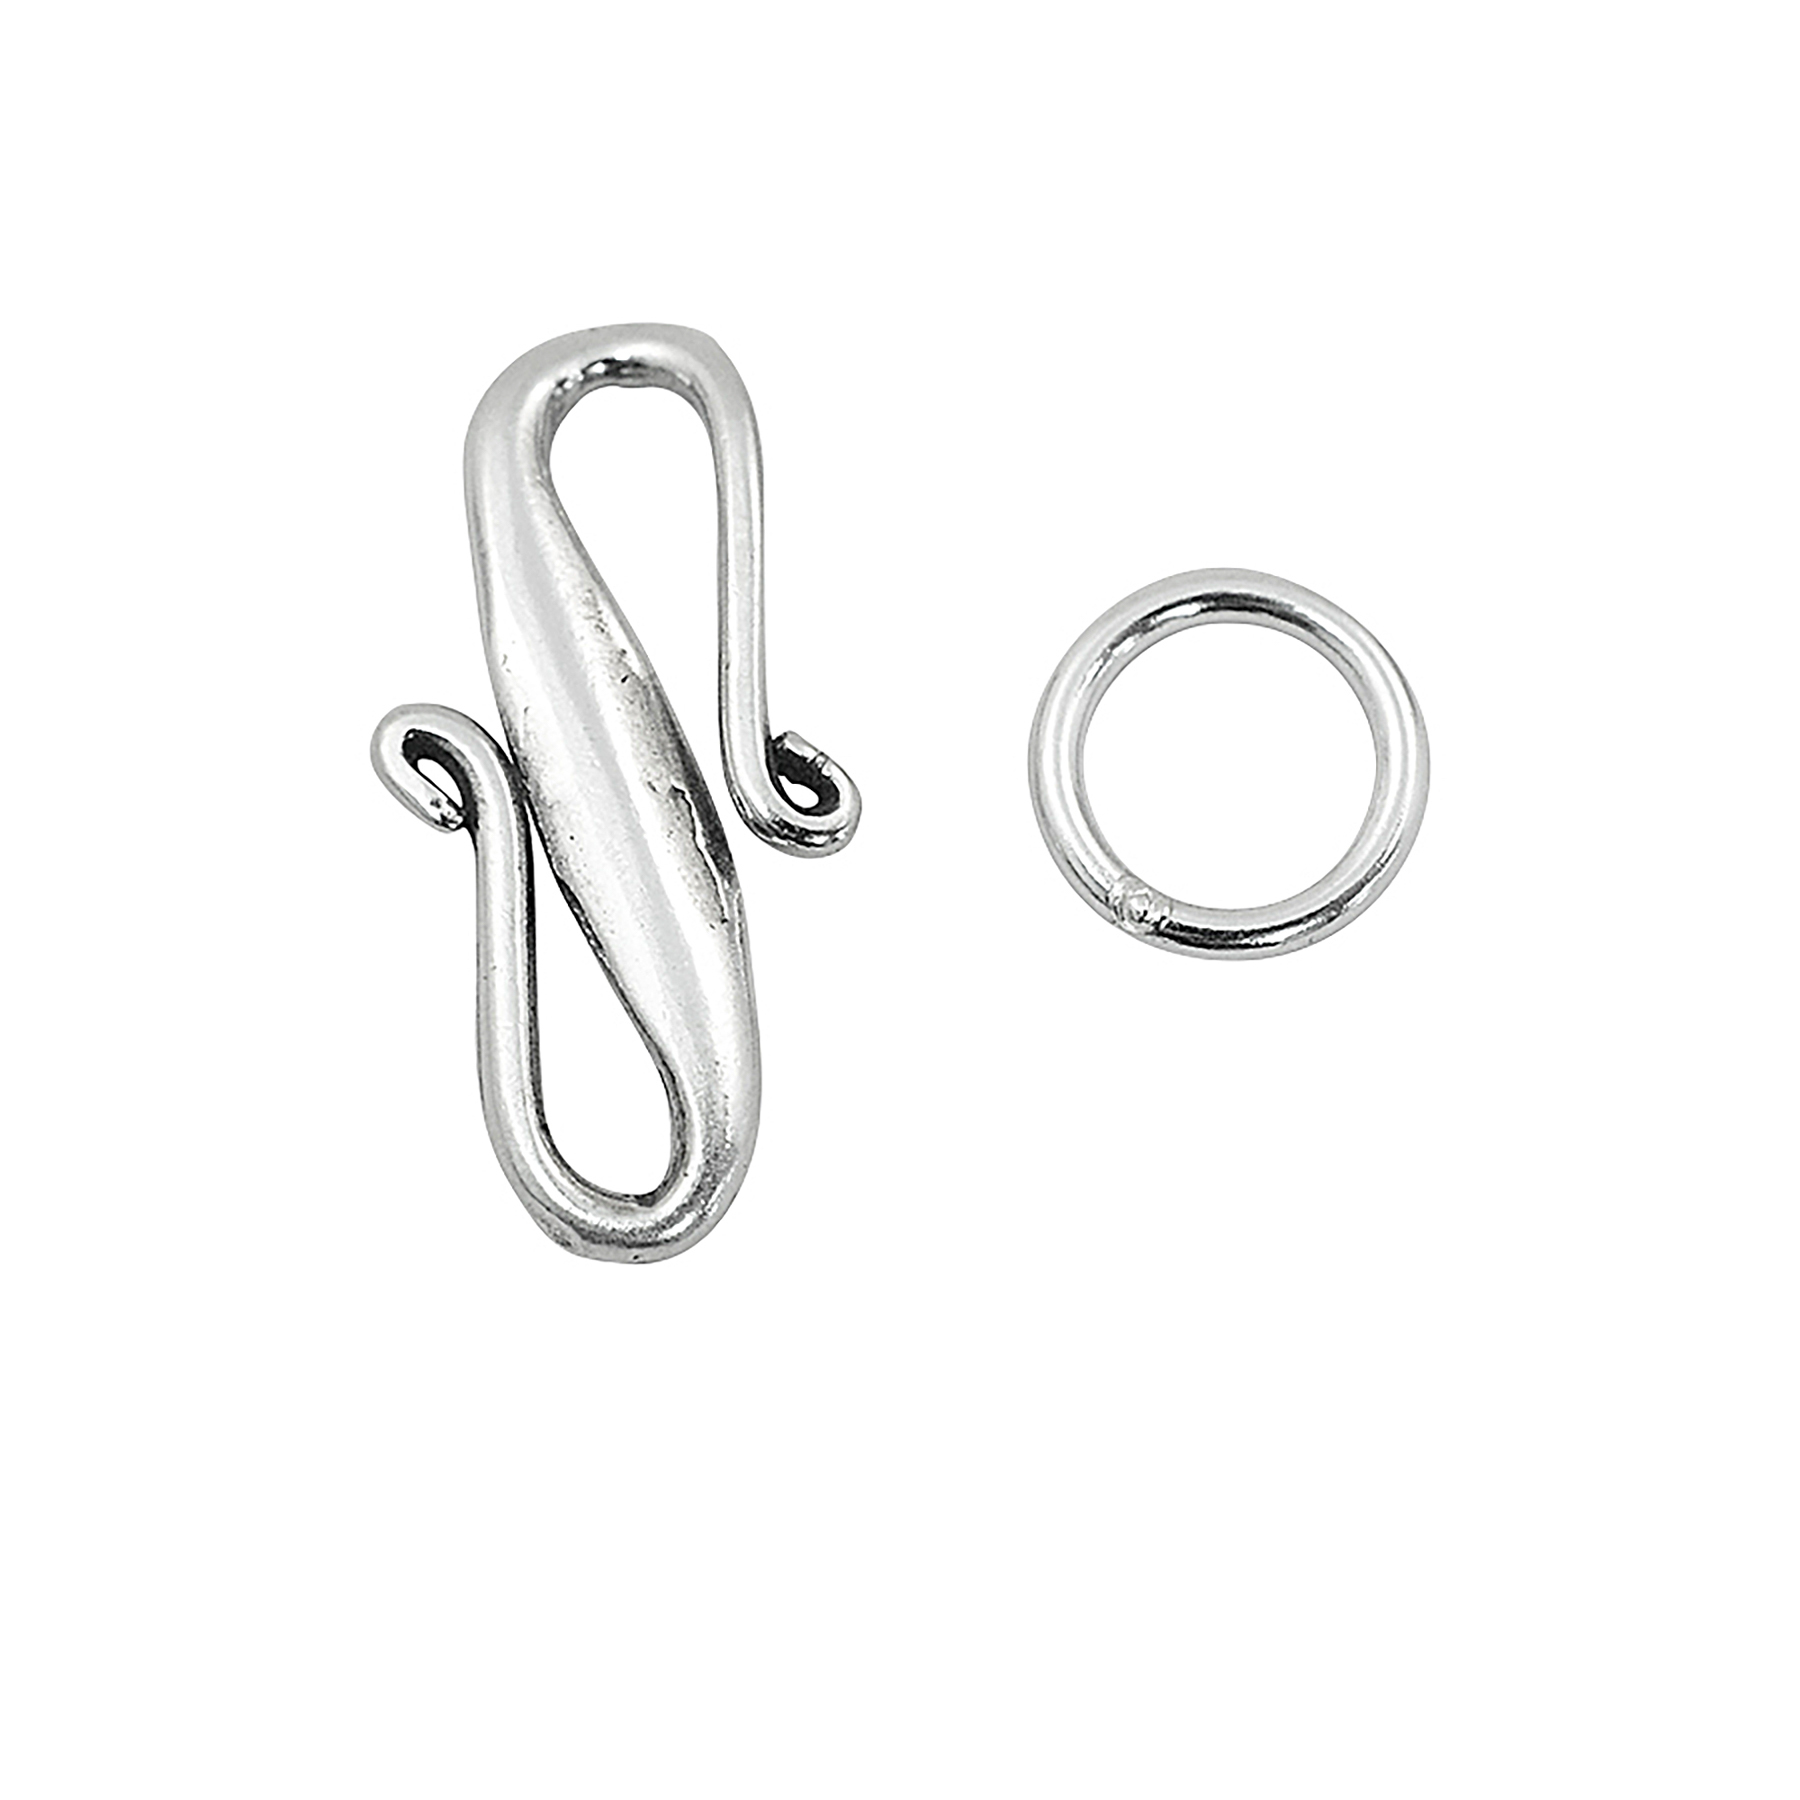 3/4 Brite Sterling Silver S-Hook Clasp w/2 Jump Rings